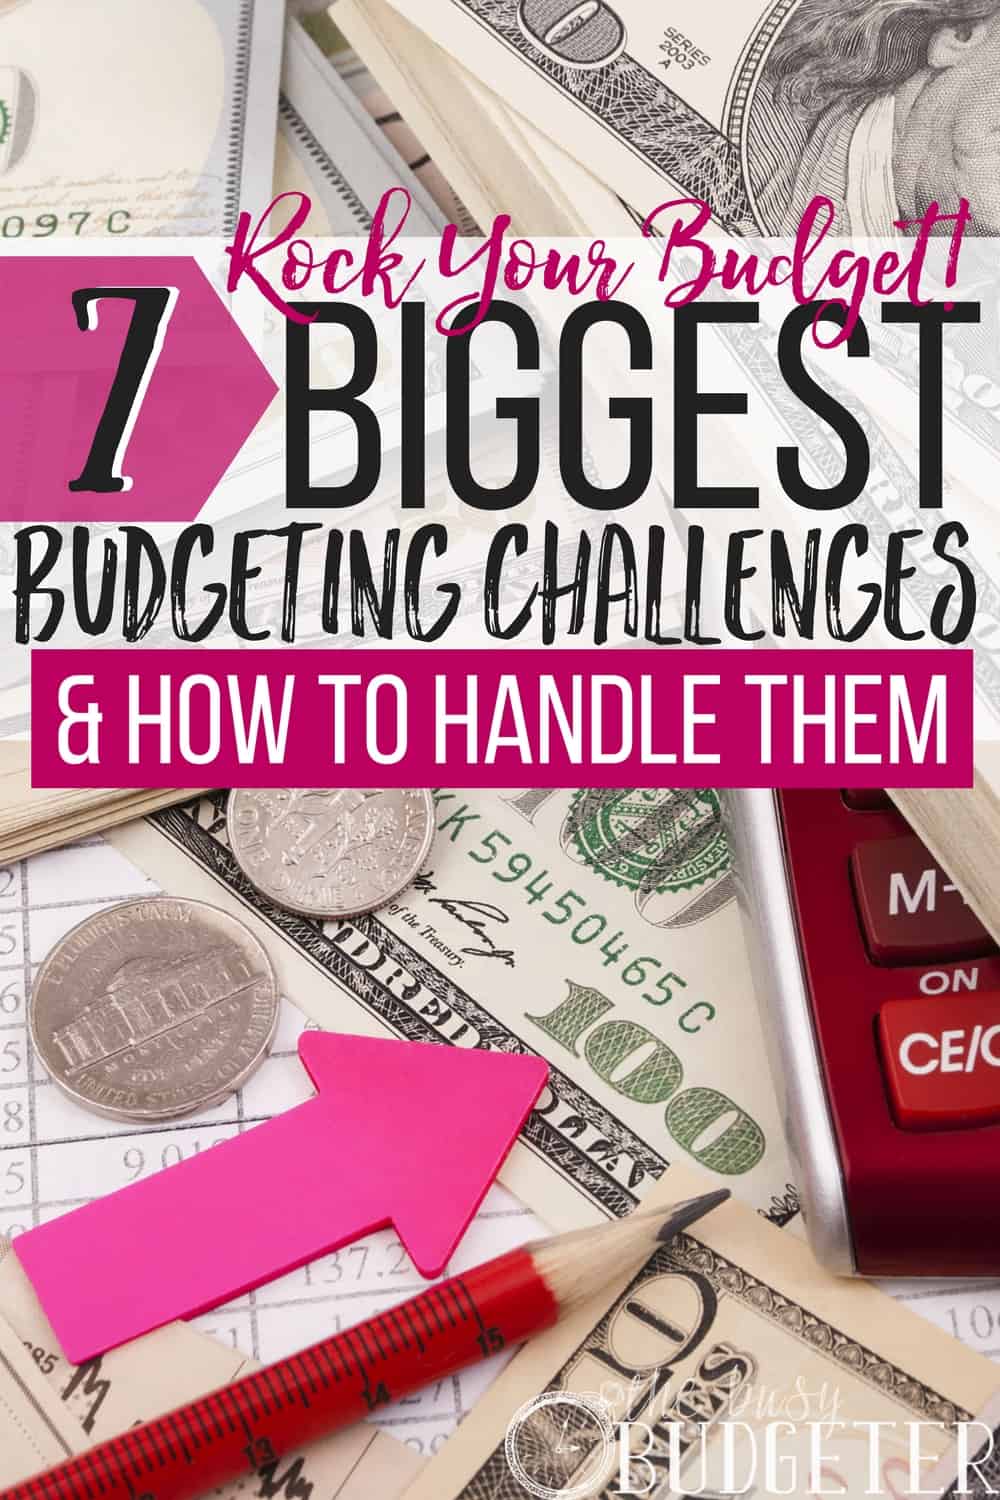 Yes! Biggest budgeting challenges indeed!! I never knew how to handle them and my husband and I never seemed to be on the same page when it came to cutting expenses and budgeting. Finally we know how to face these challenges head on and it actually works!! Great article!